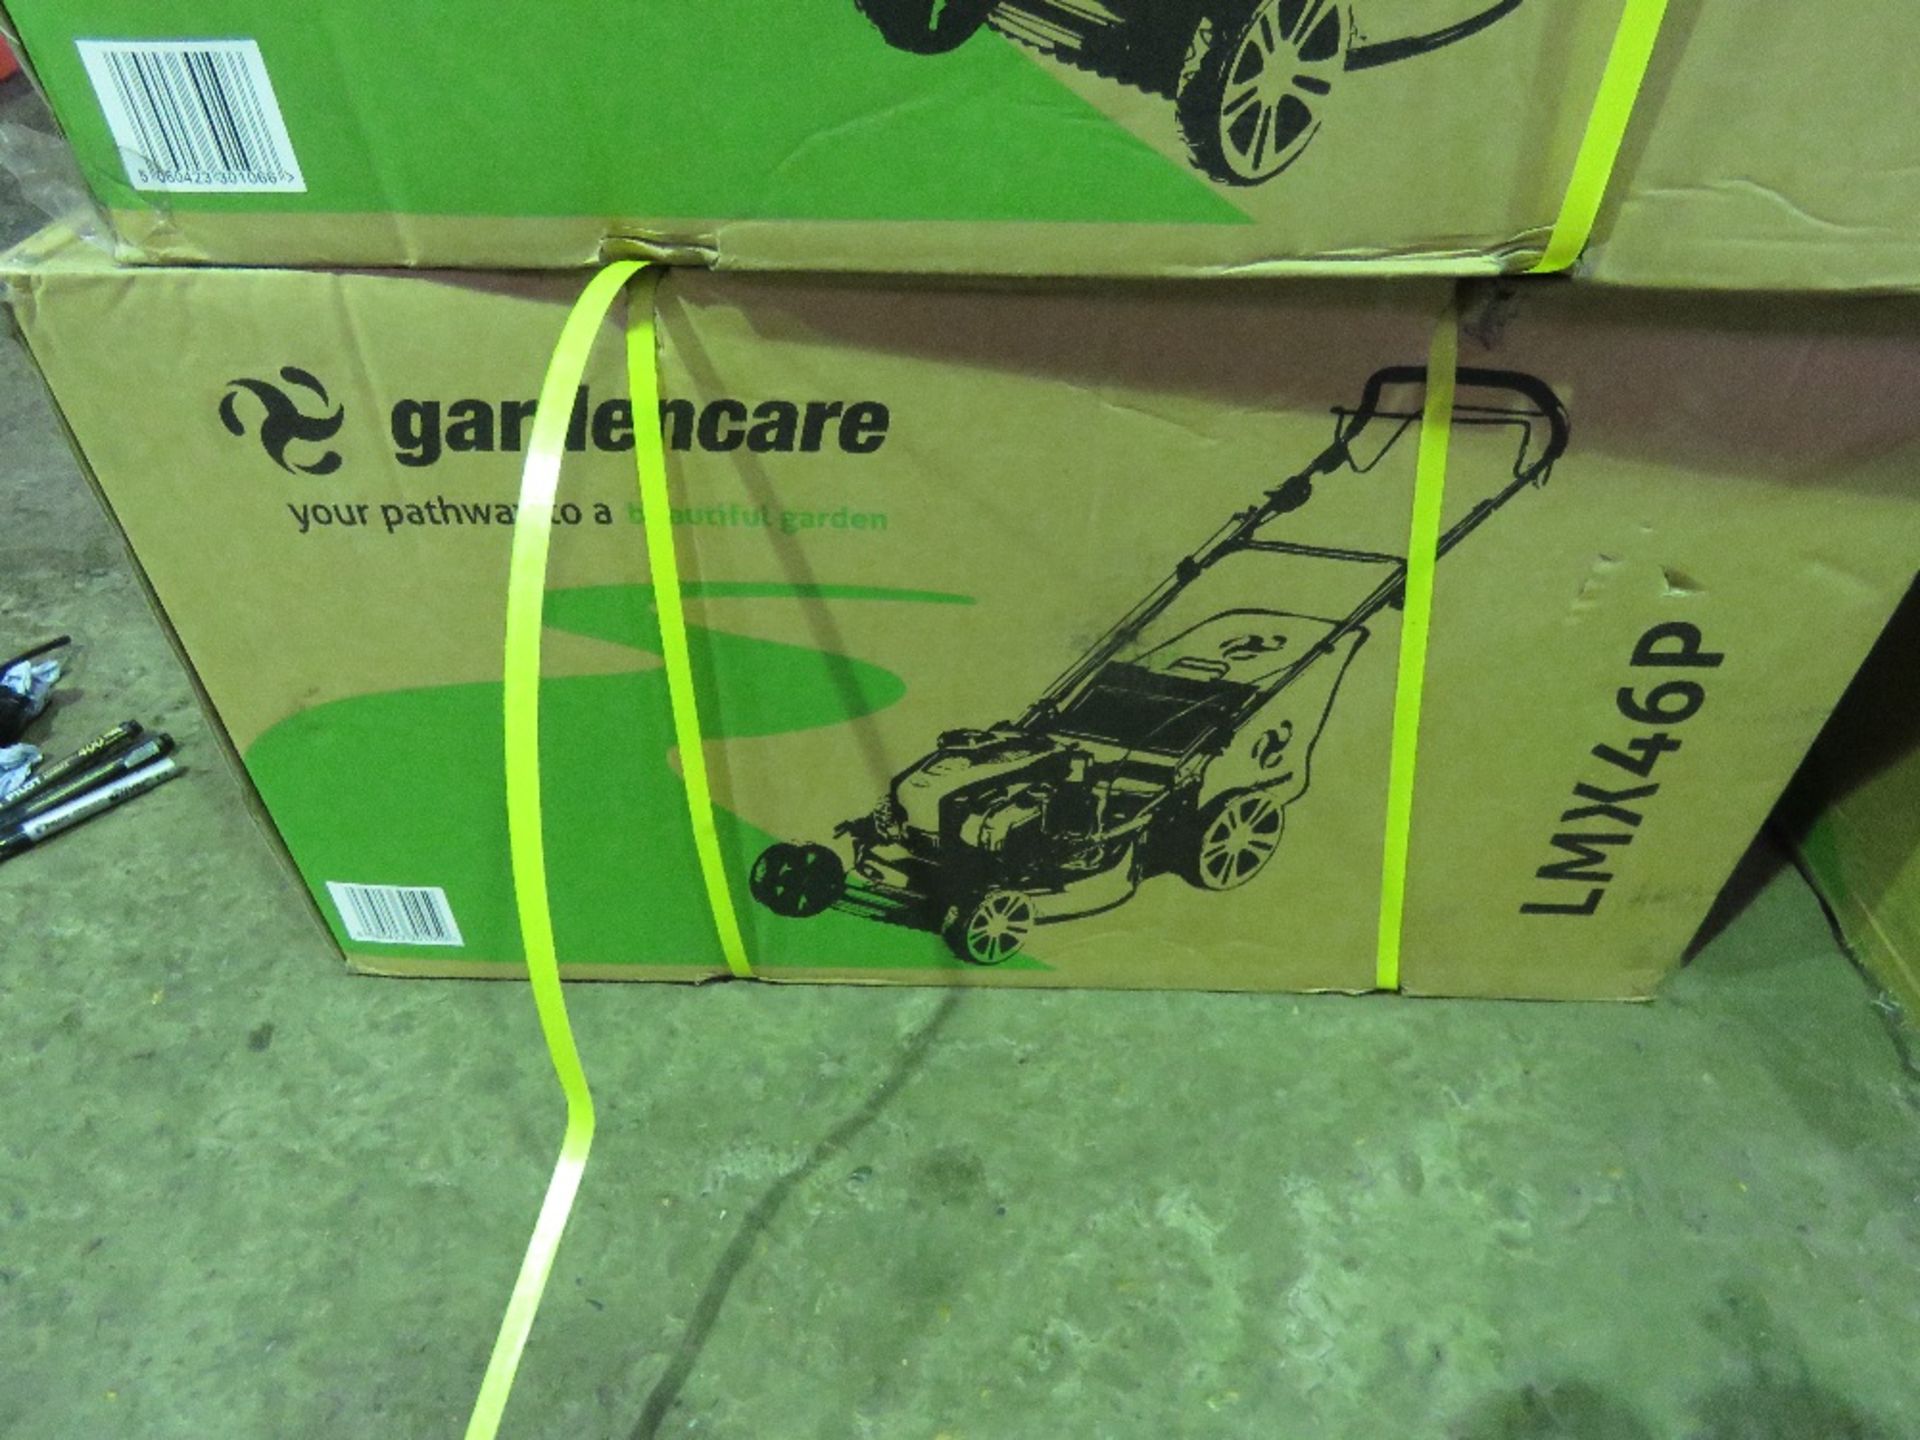 GARDENCARE LMX46 LAWNMOWER. BOXED, UNUSED, DIRECT FROM LOCAL COMPANY BEING SURPLUS STOCK.